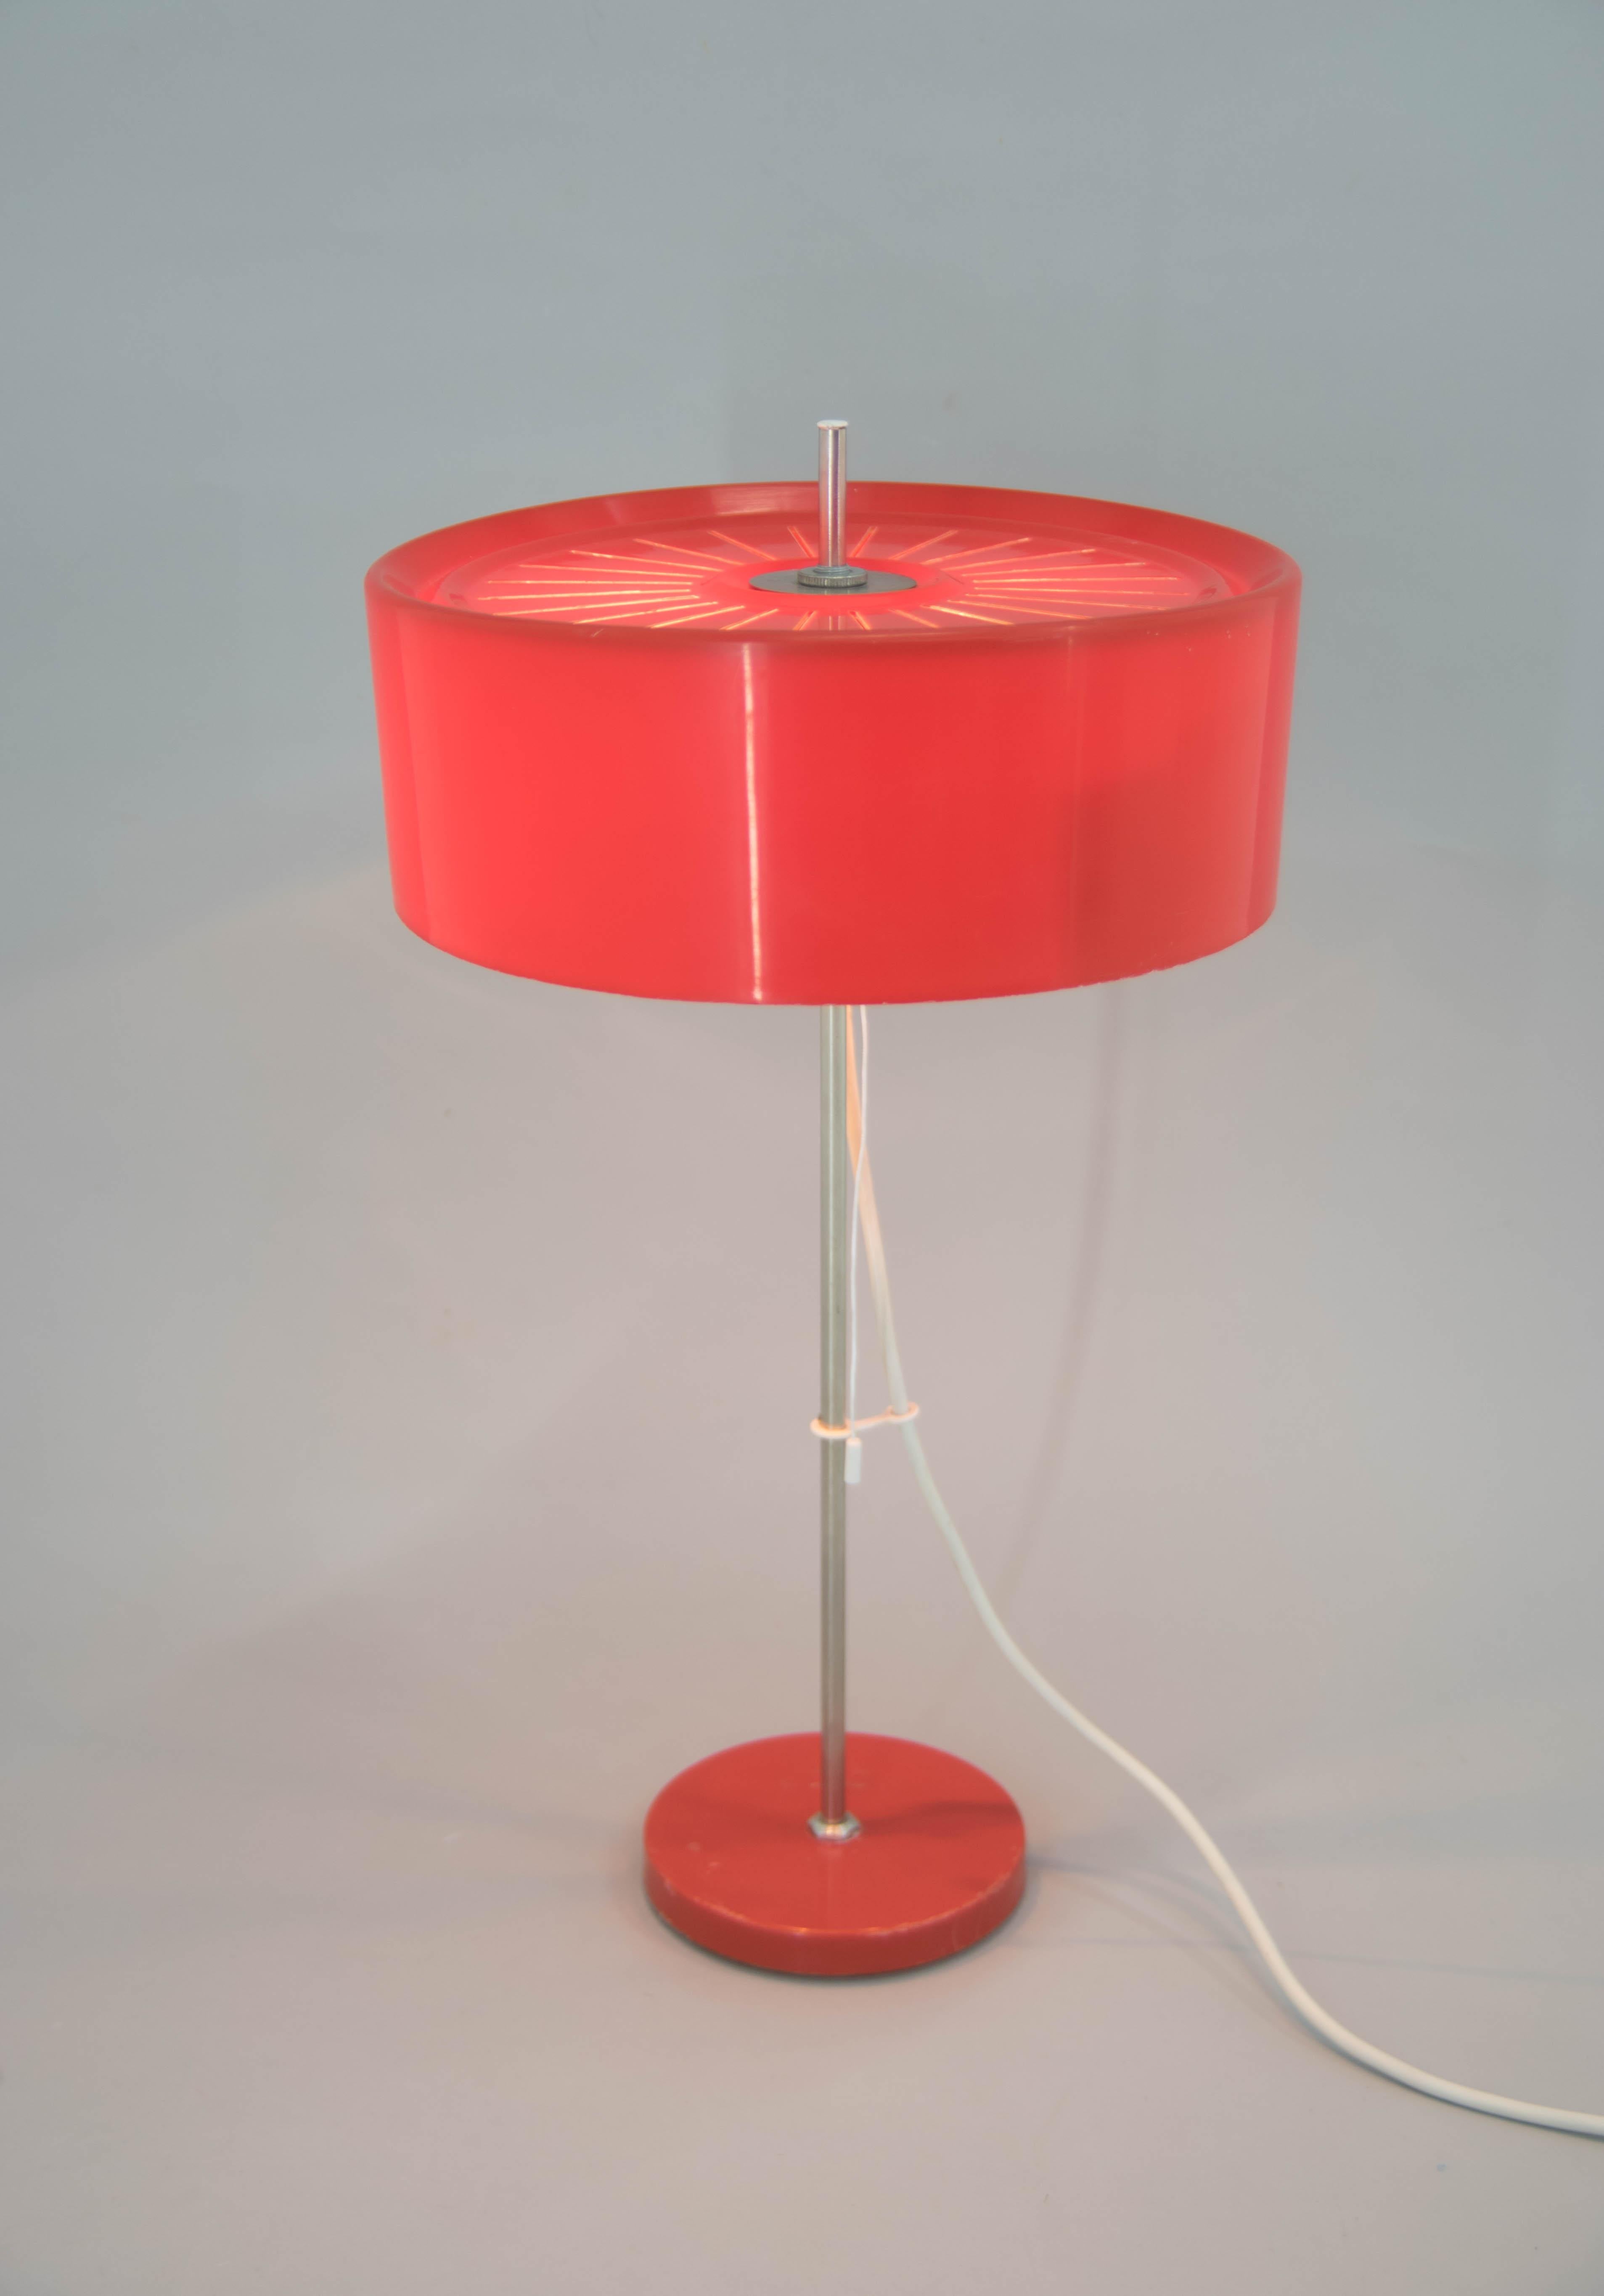 Metal base covered with red plastic.
Adjustable height shade made of red plastic 
Rewired: 2x60W, E25-E27 bulbs
US plug adapter included
